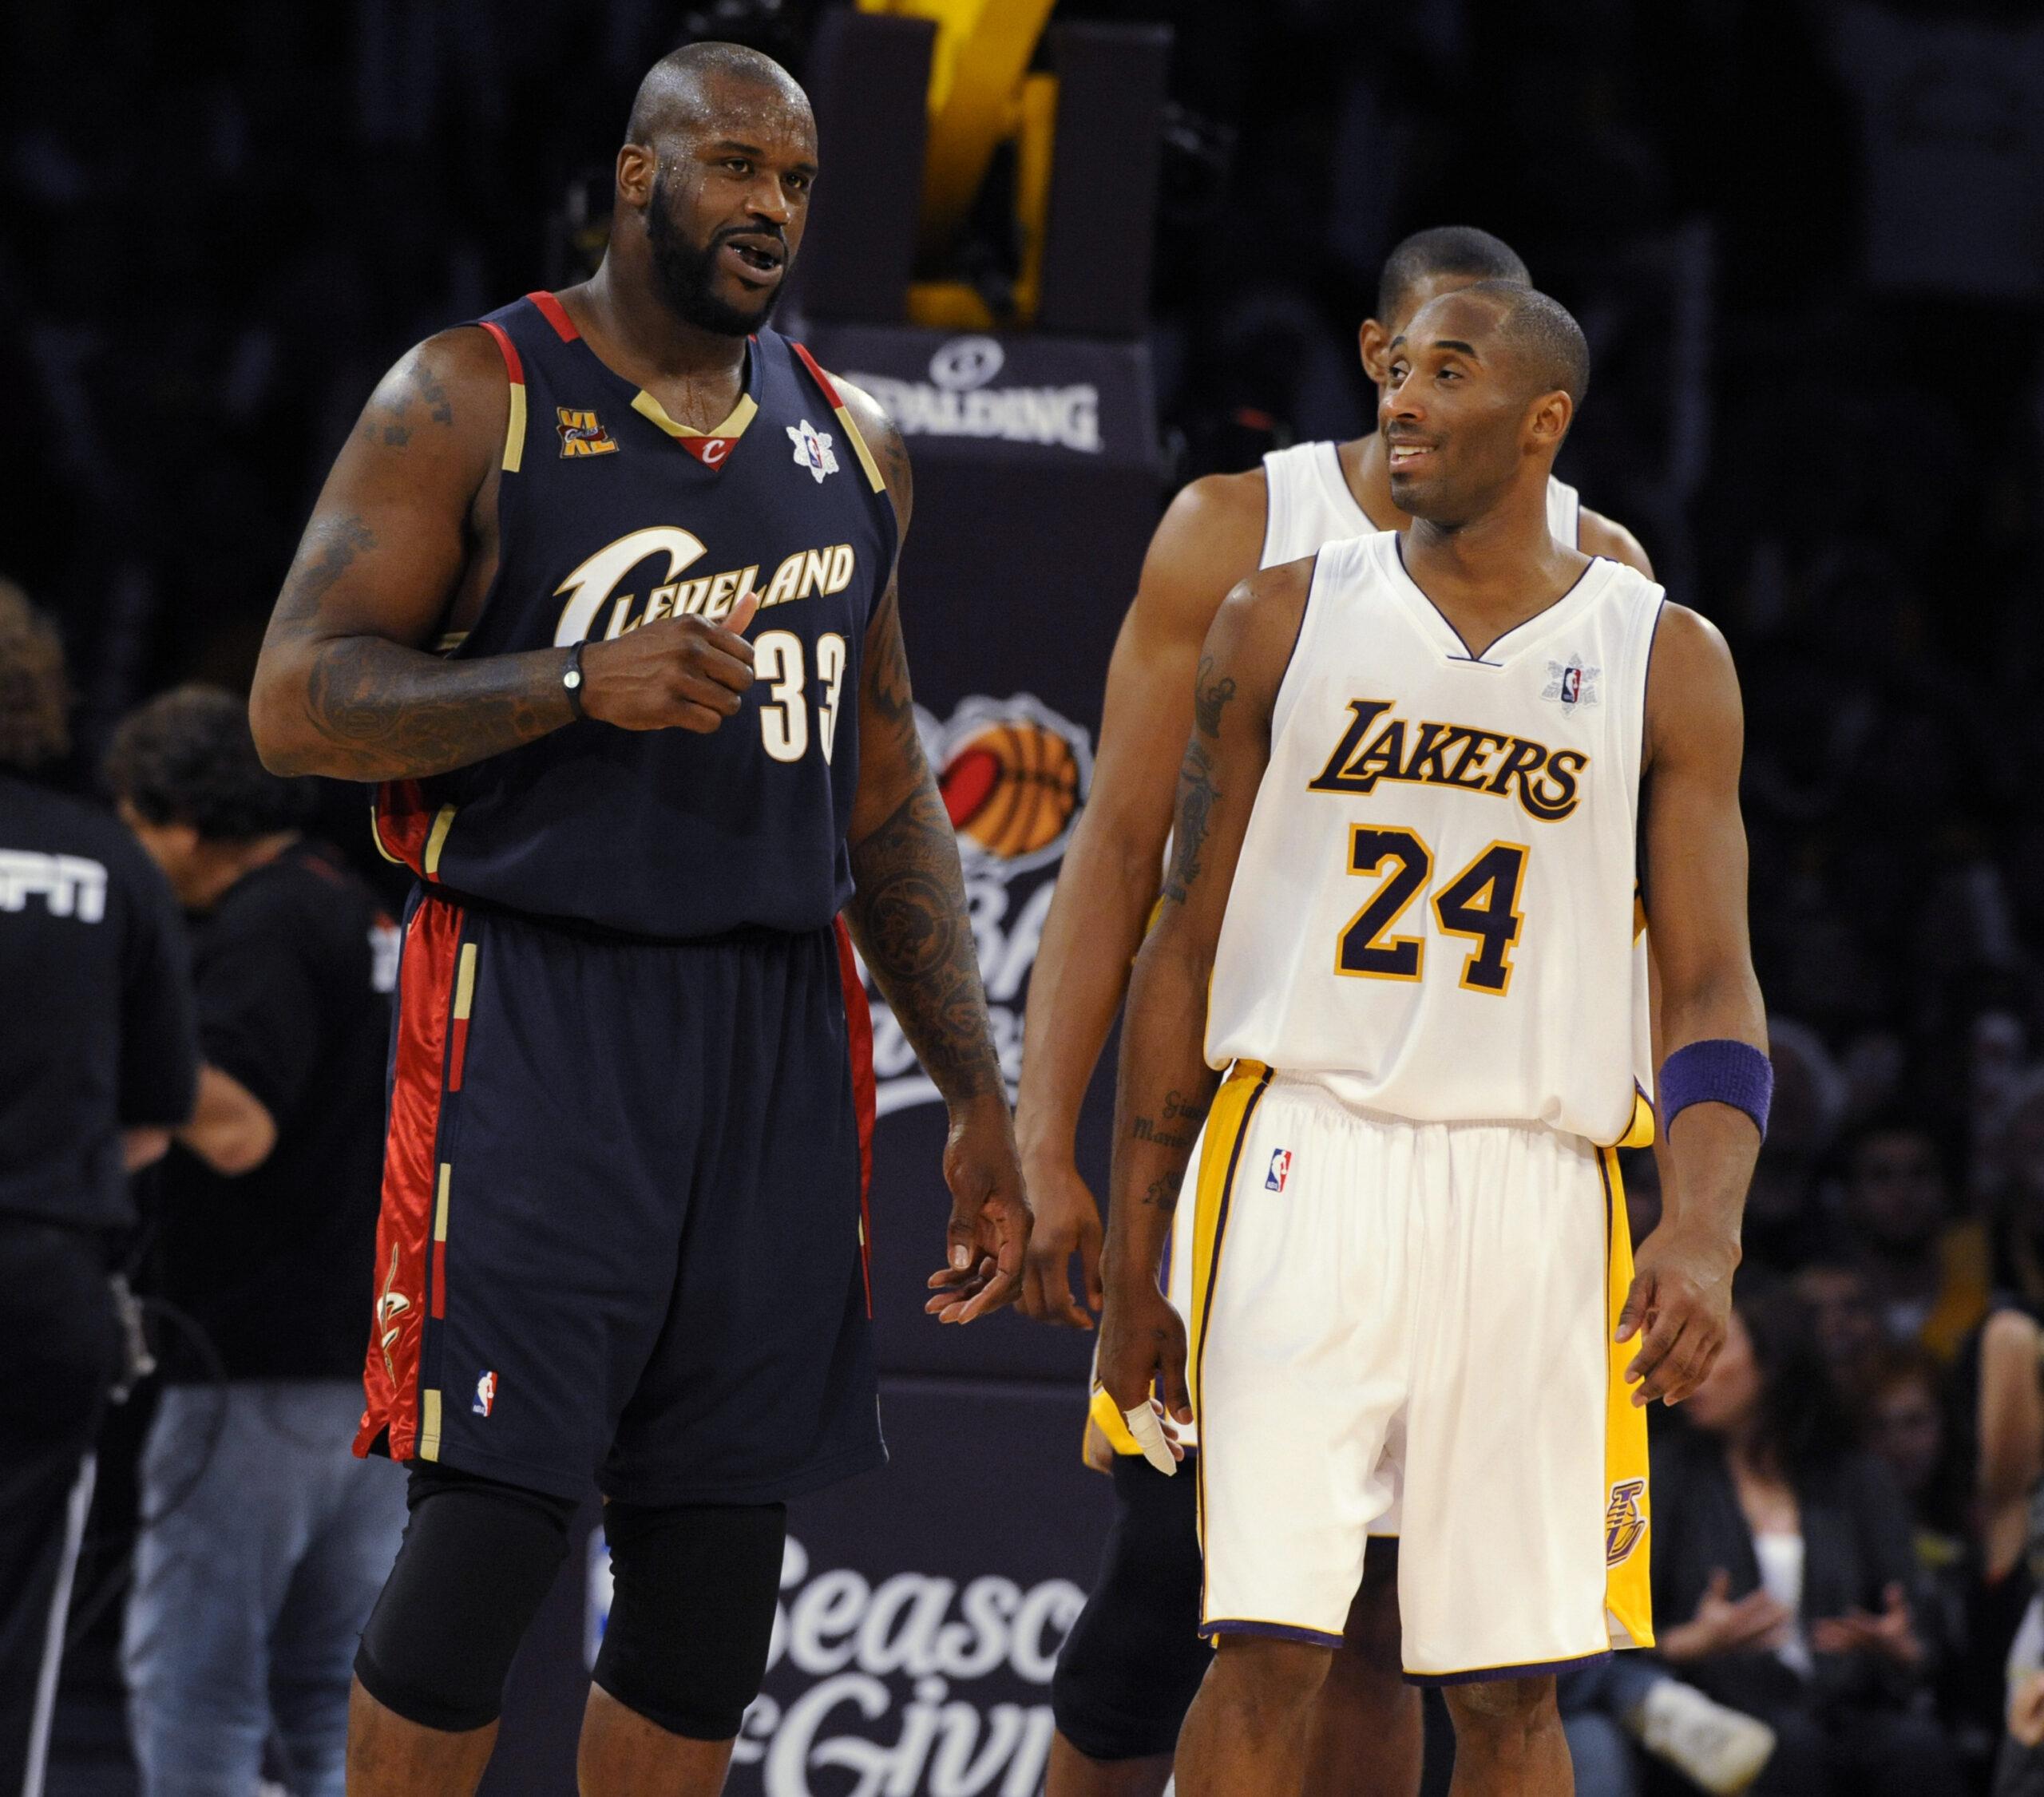 Kobe Bryant and Shaquille O'Neal talk during the second half of an NBA basketball game in Los Angeles on December 25, 2009